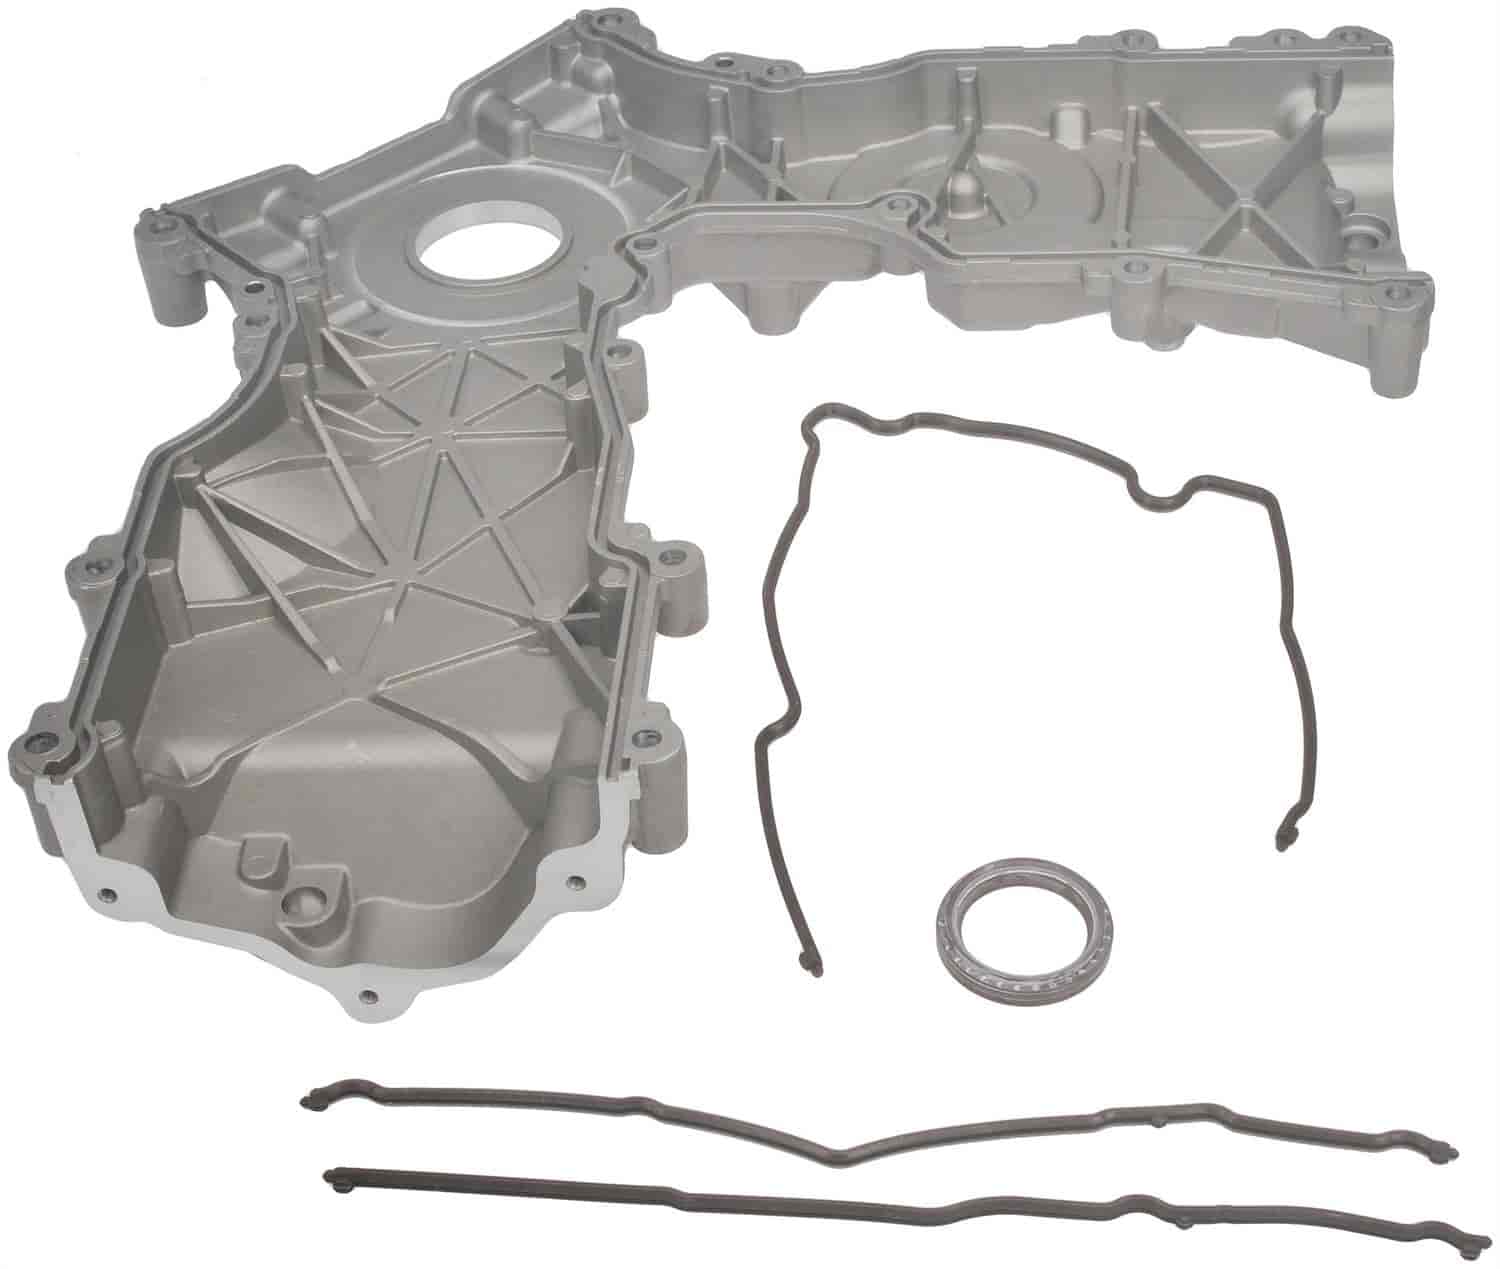 635-129 Timing Cover Kit for Select 2004-2014 Ford F-150, Expedition, Lobo, Lincoln Mark LT, Navigator